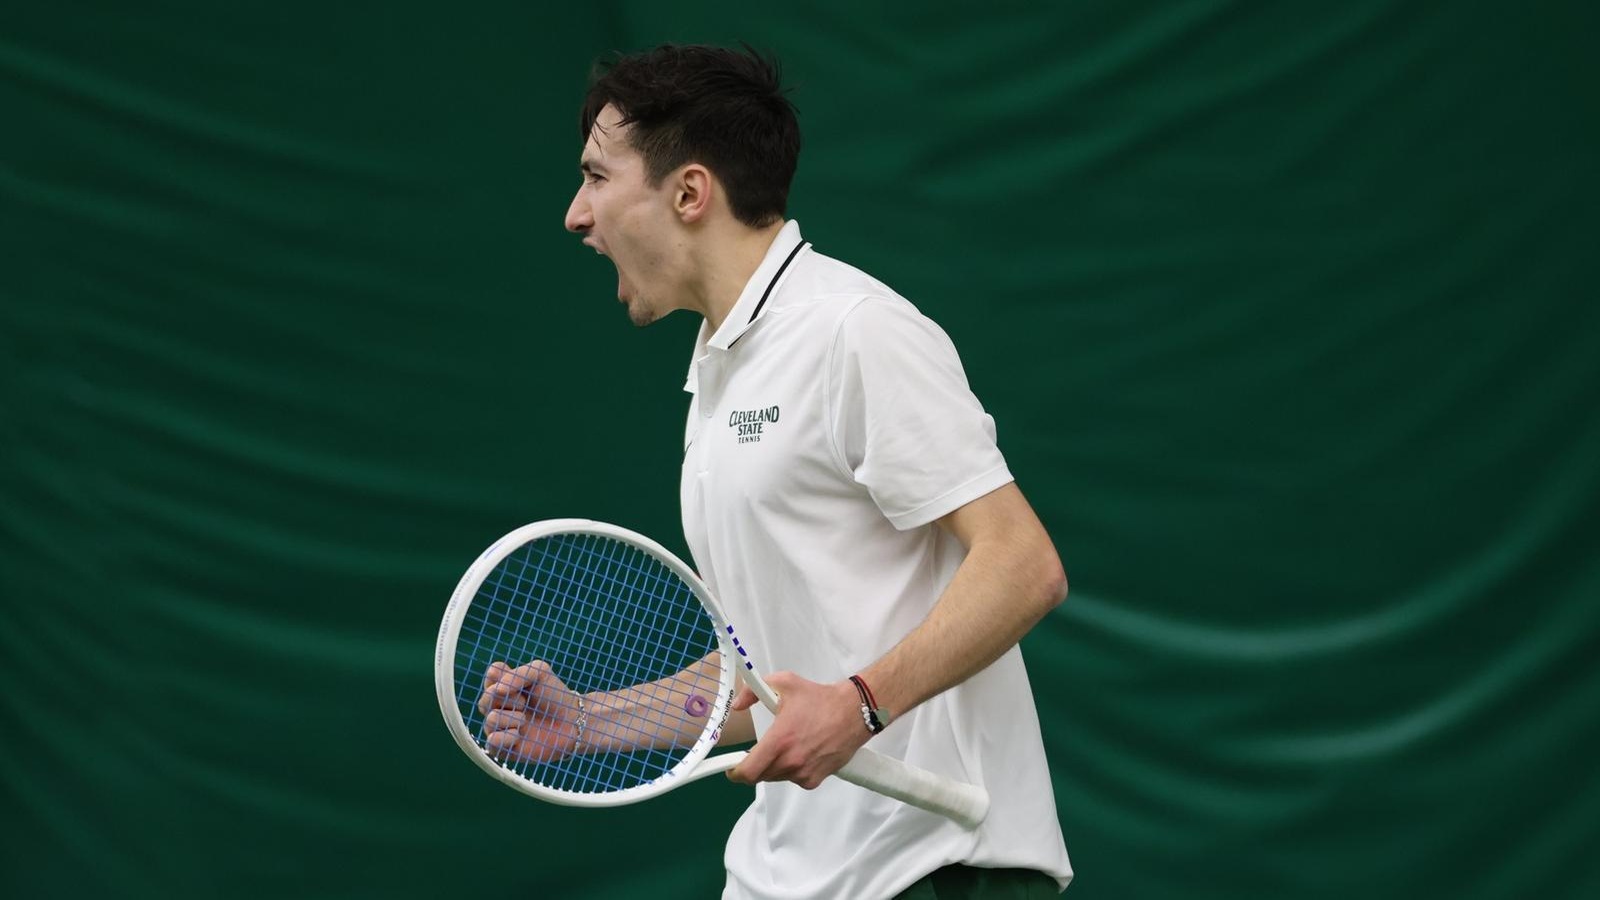 Cleveland State Men's Tennis Set To Begin #HLTennis Tournament Play As No. 1 Seed